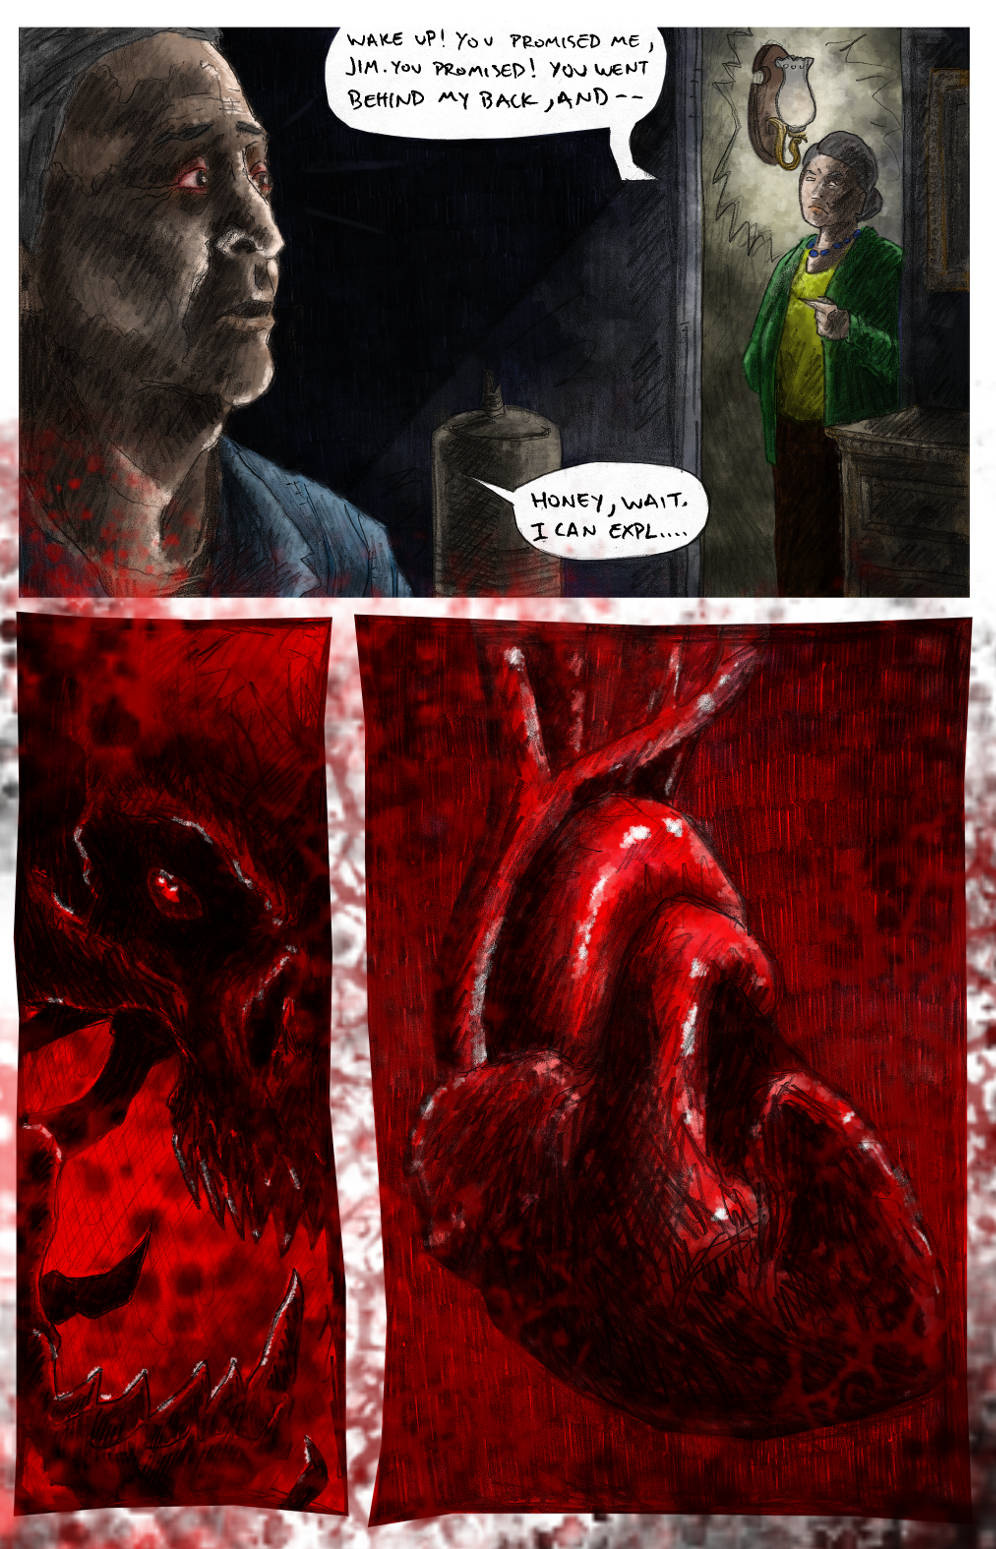 Page 34. Please enable images to read the comics :)